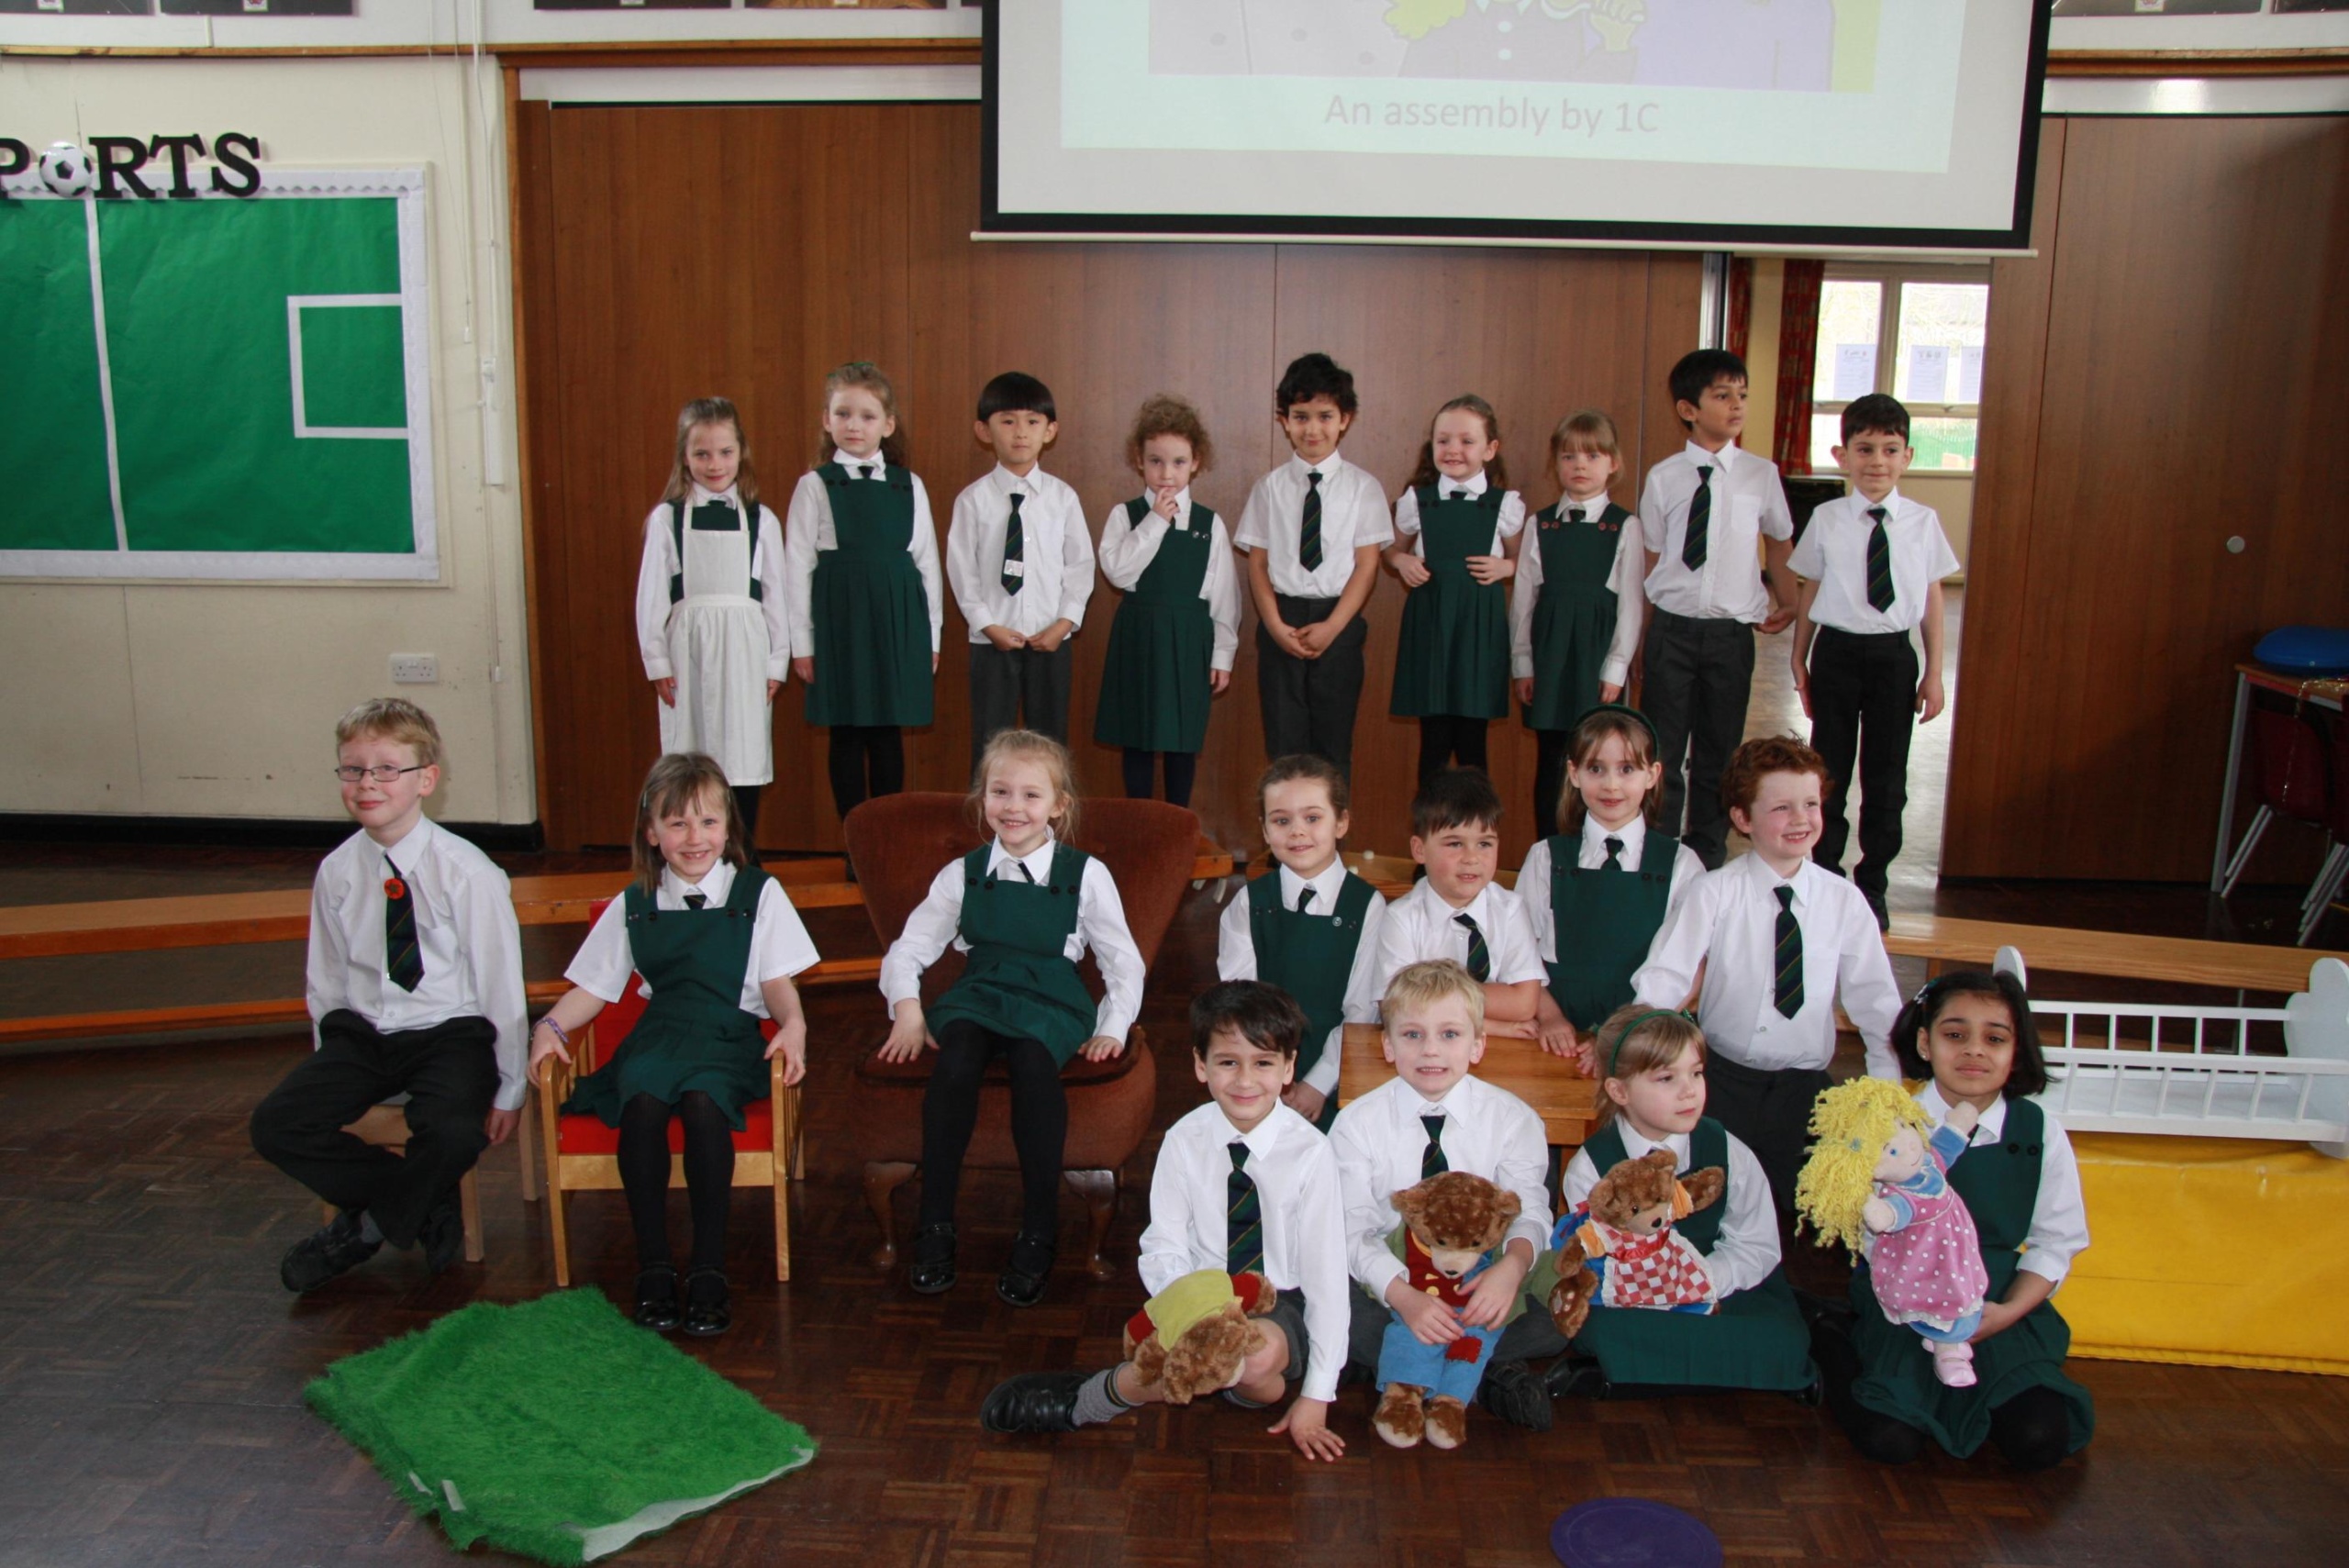 Year 1 pupils at cheadle hulme school present their springtime class assembly in the Junior school hall